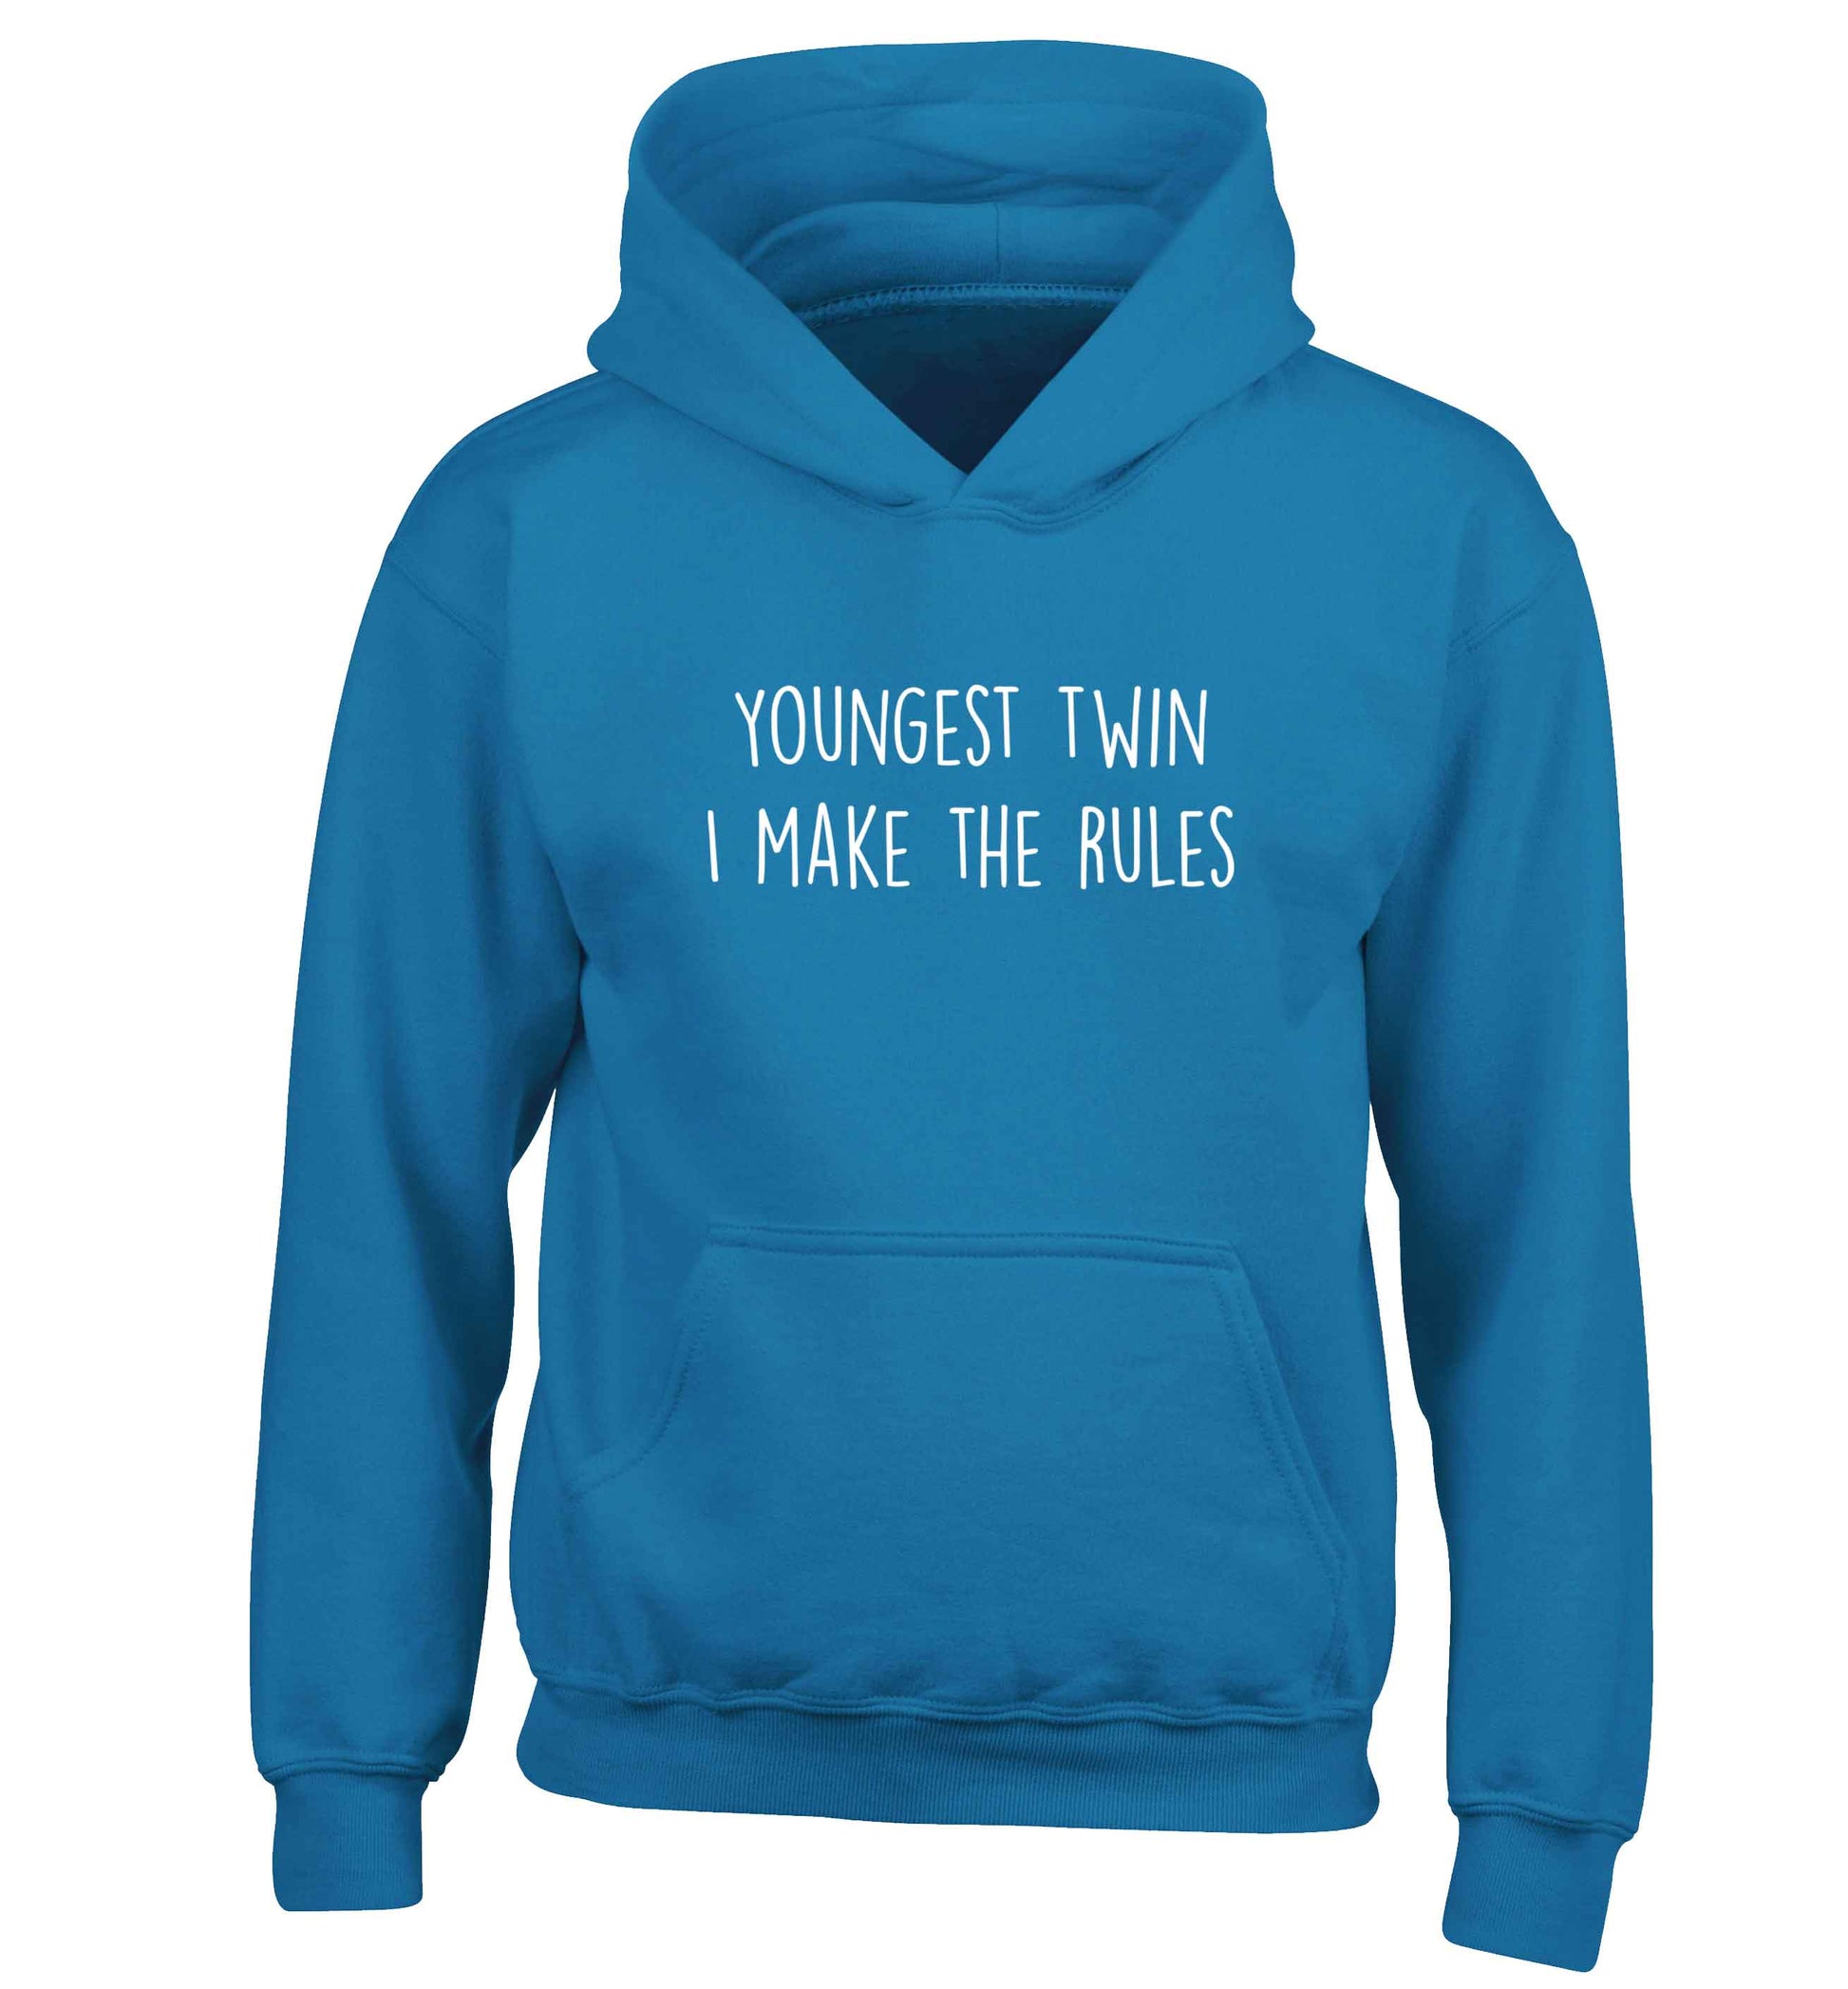 Youngest twin I make the rules children's blue hoodie 12-13 Years